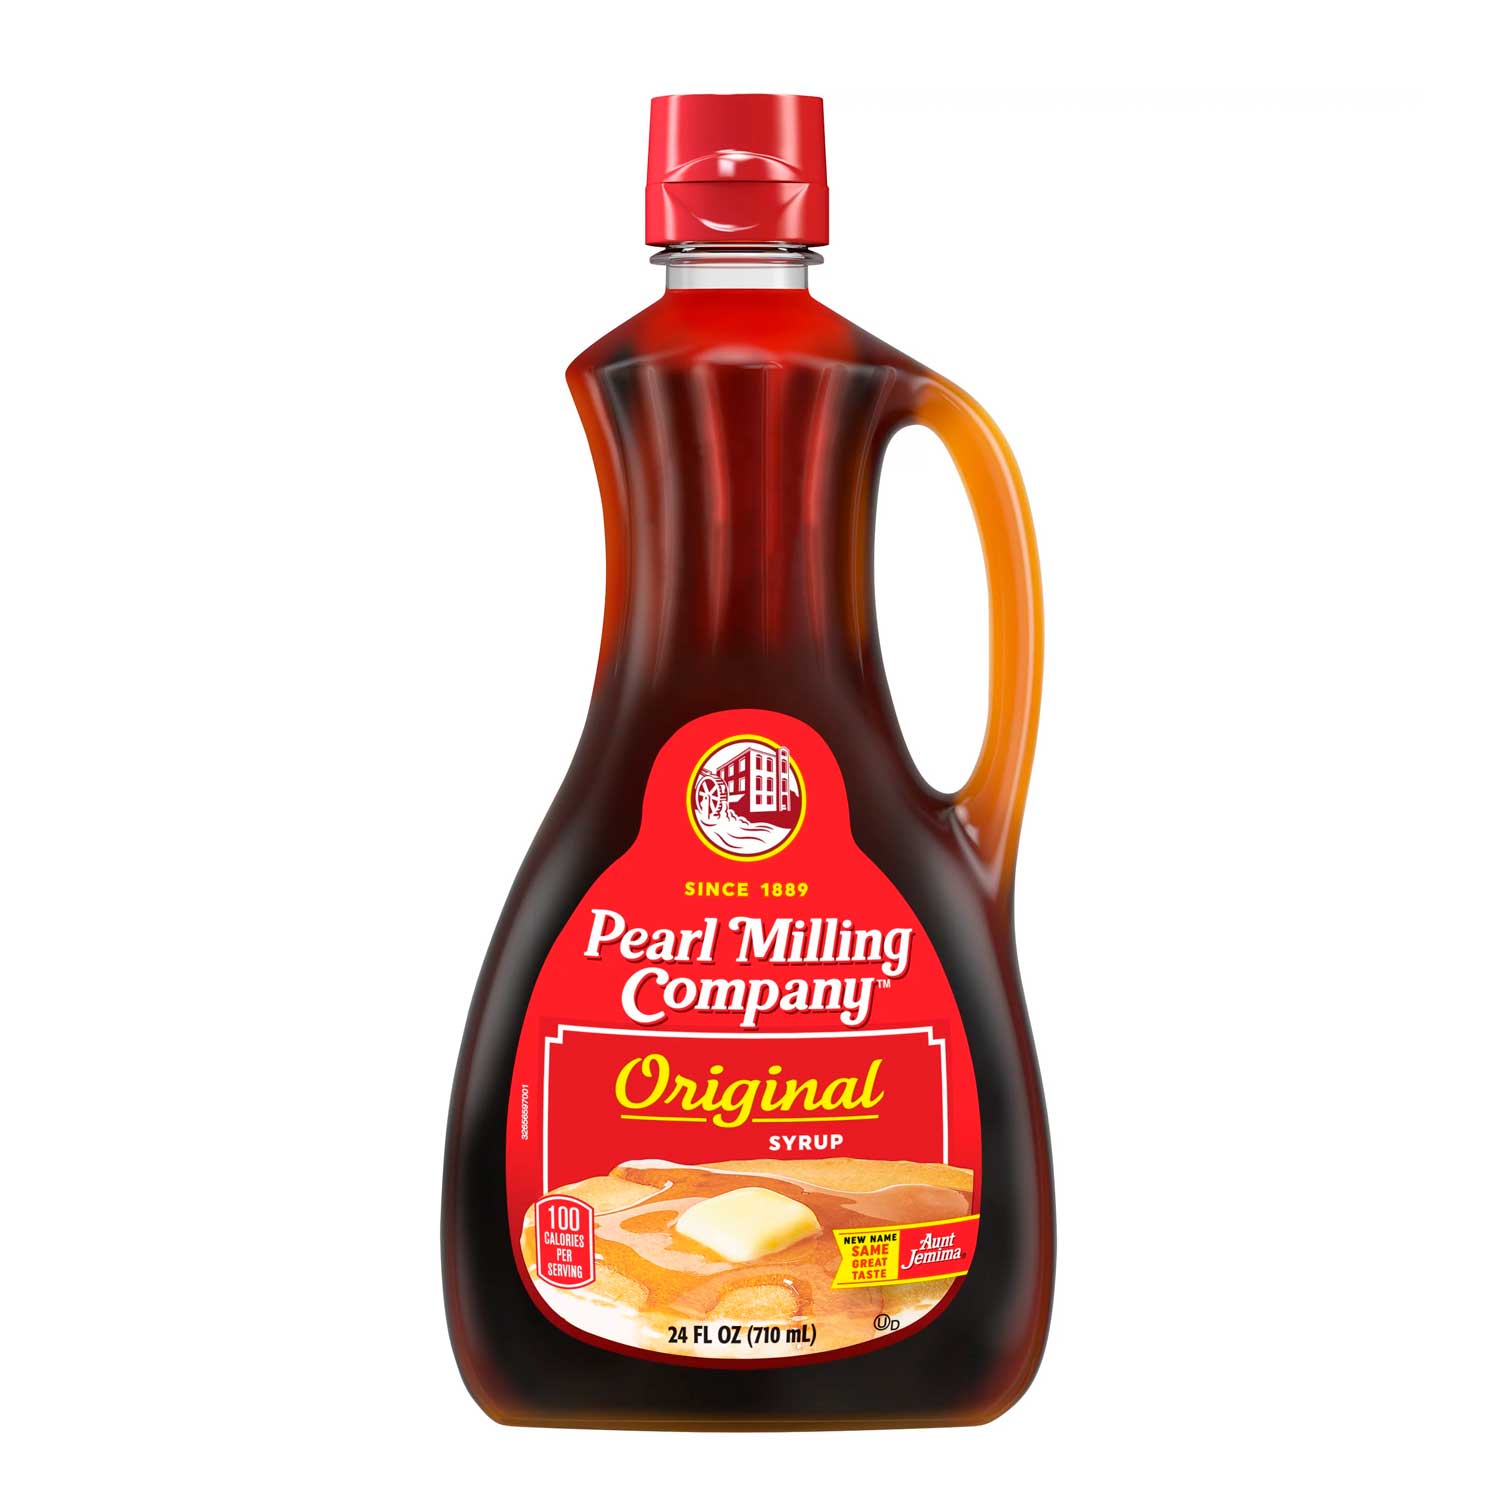 Sirope de Panquecas y Waffles Pearl Milling Company. 710 ml